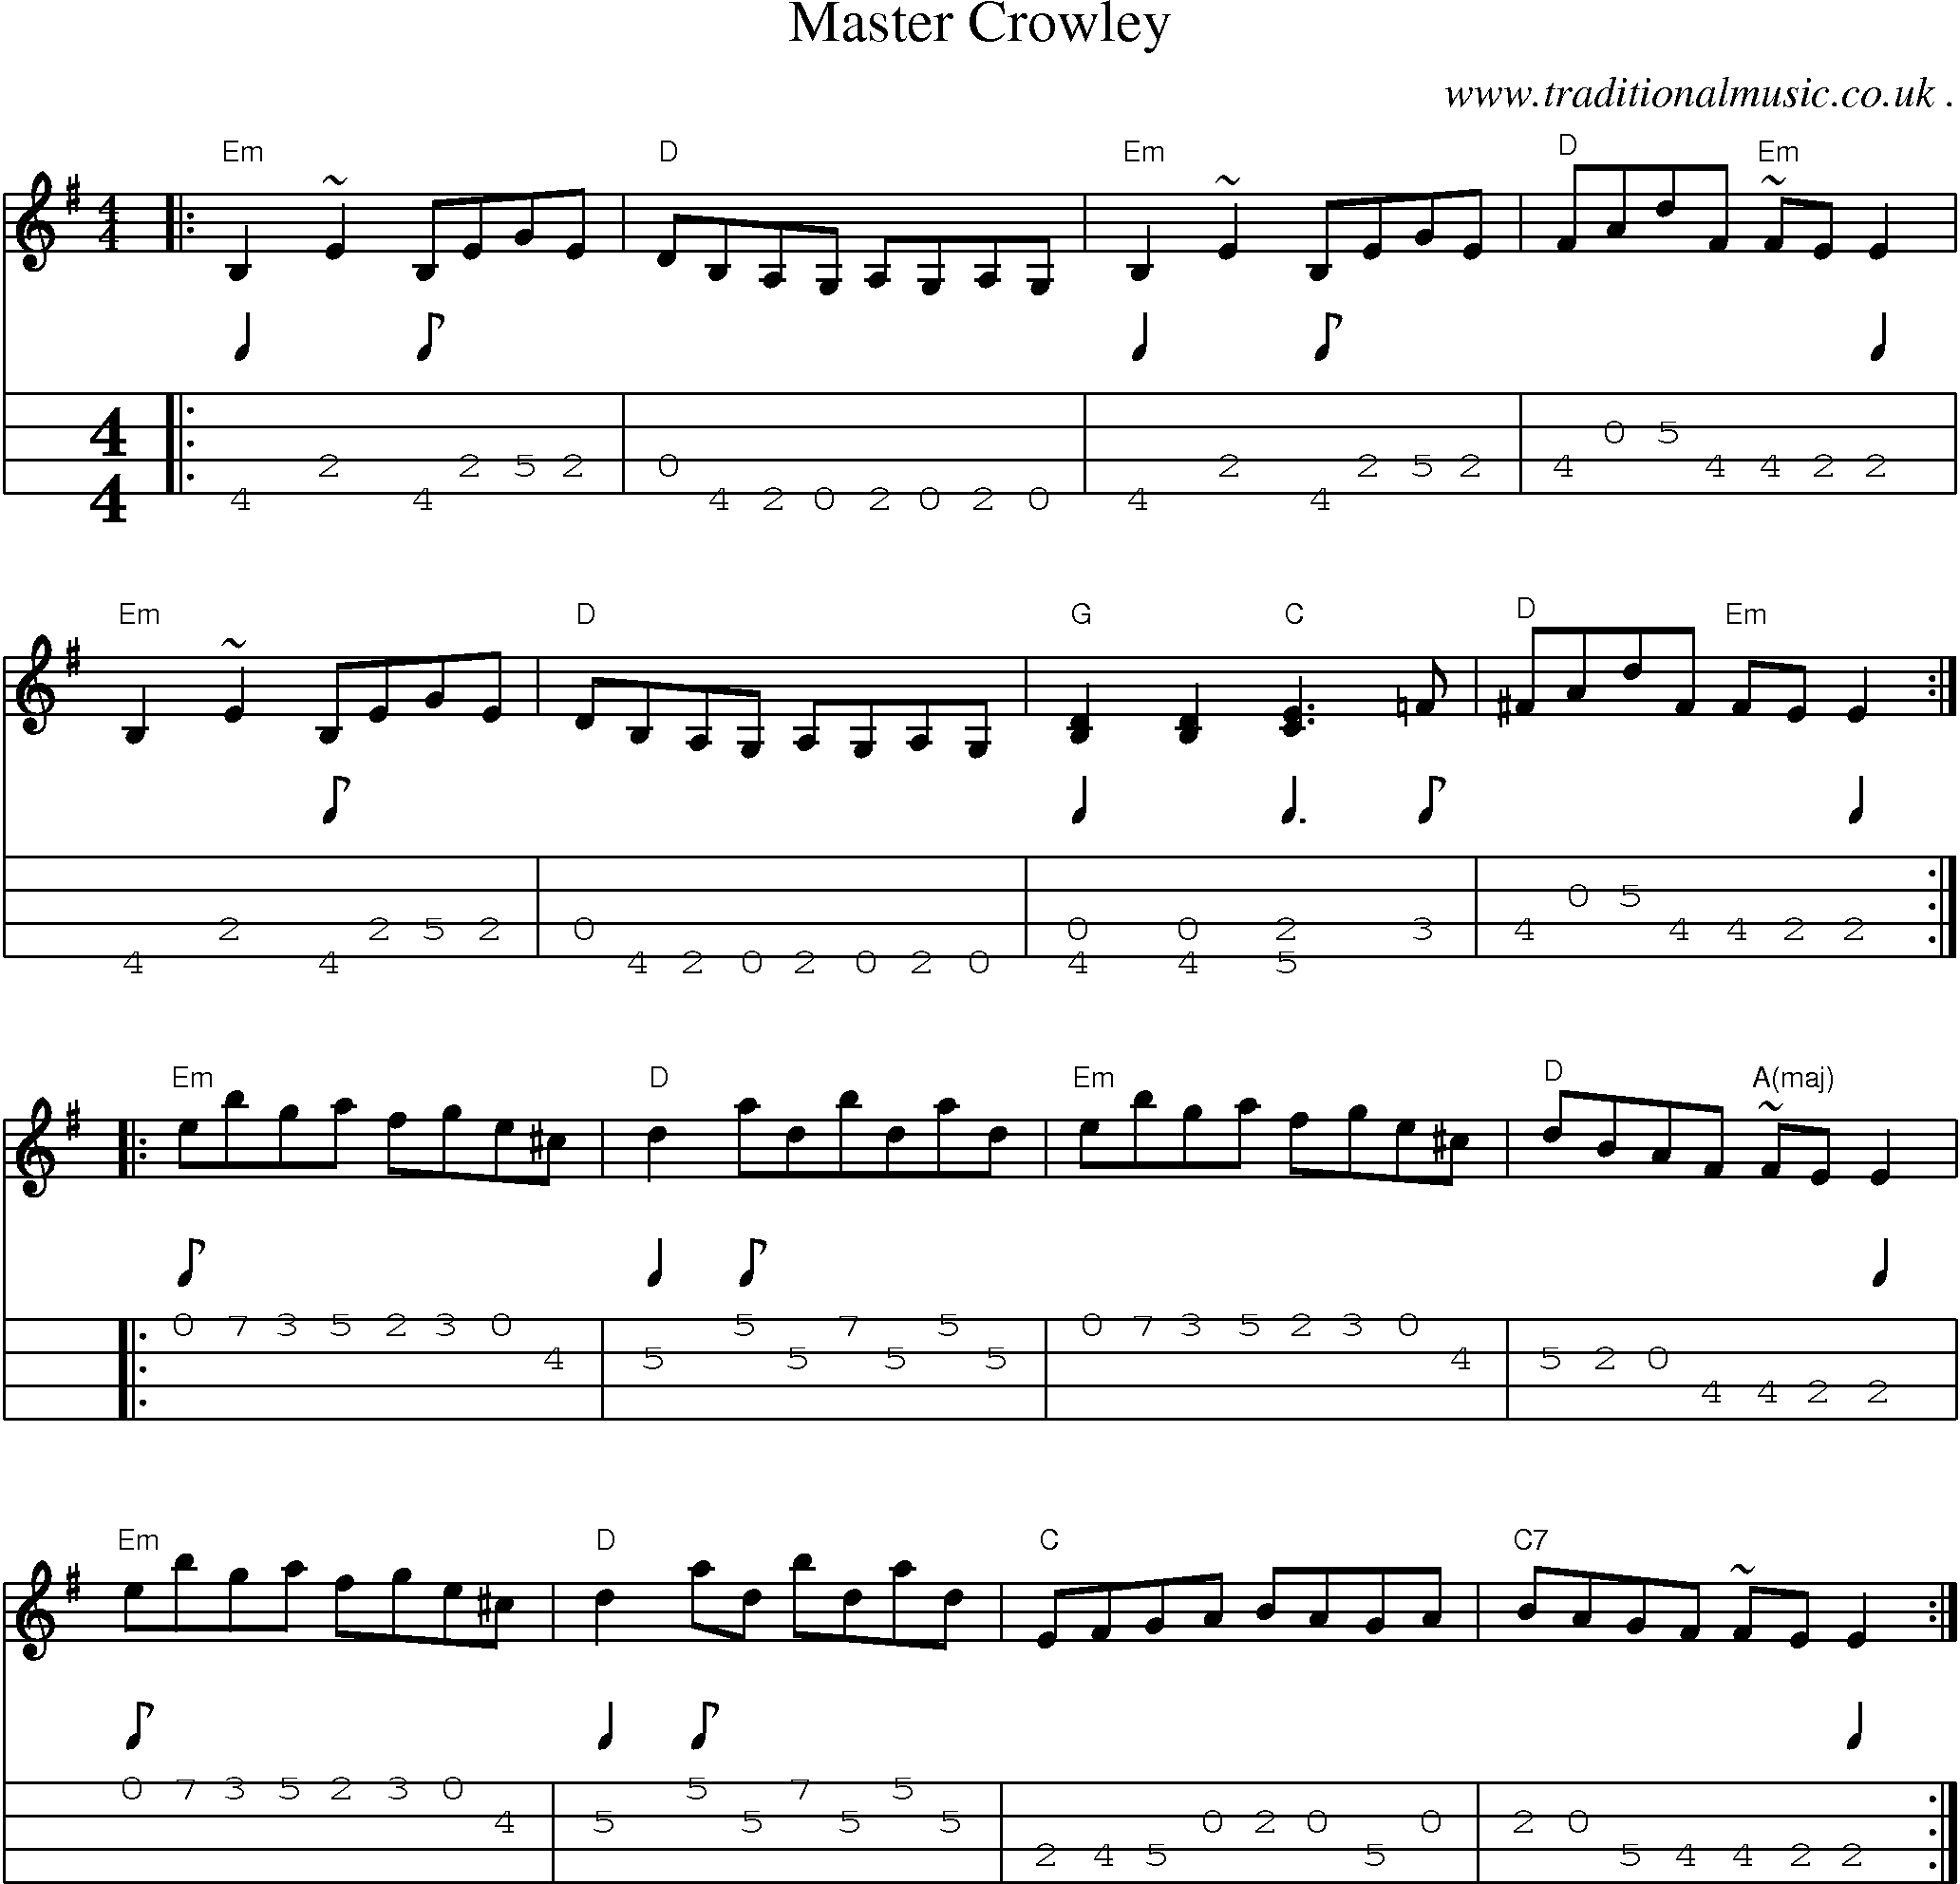 Music Score and Guitar Tabs for Master Crowley